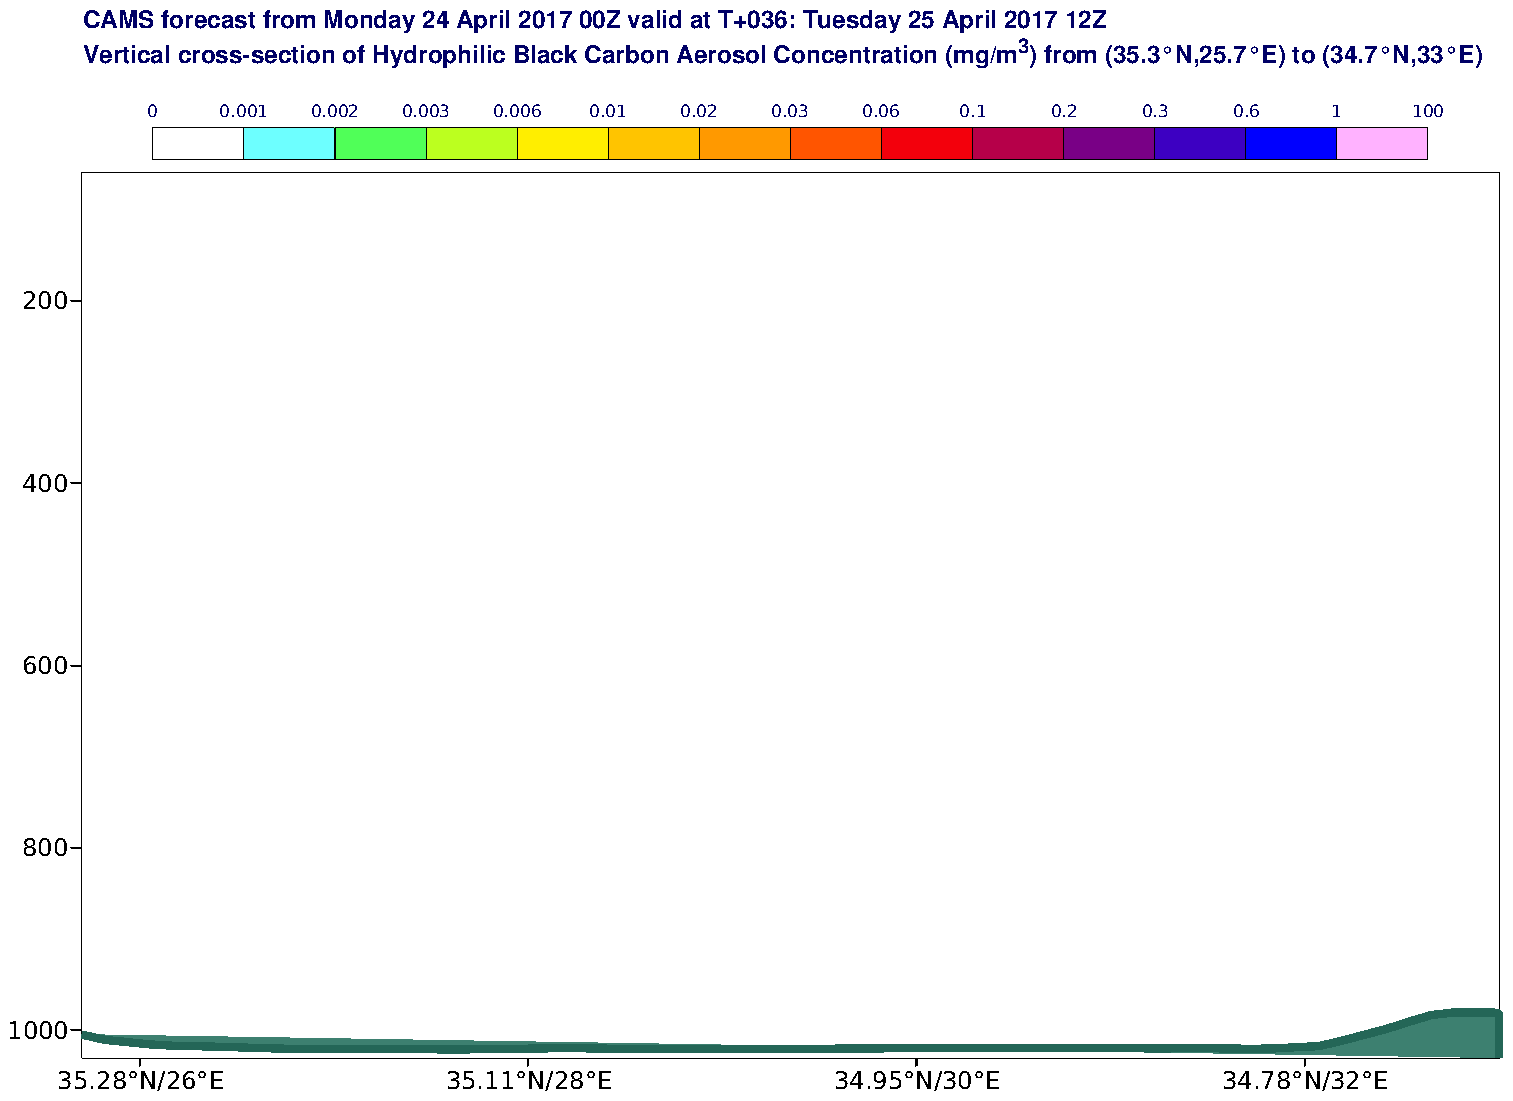 Vertical cross-section of Hydrophilic Black Carbon Aerosol Concentration (mg/m3) valid at T36 - 2017-04-25 12:00